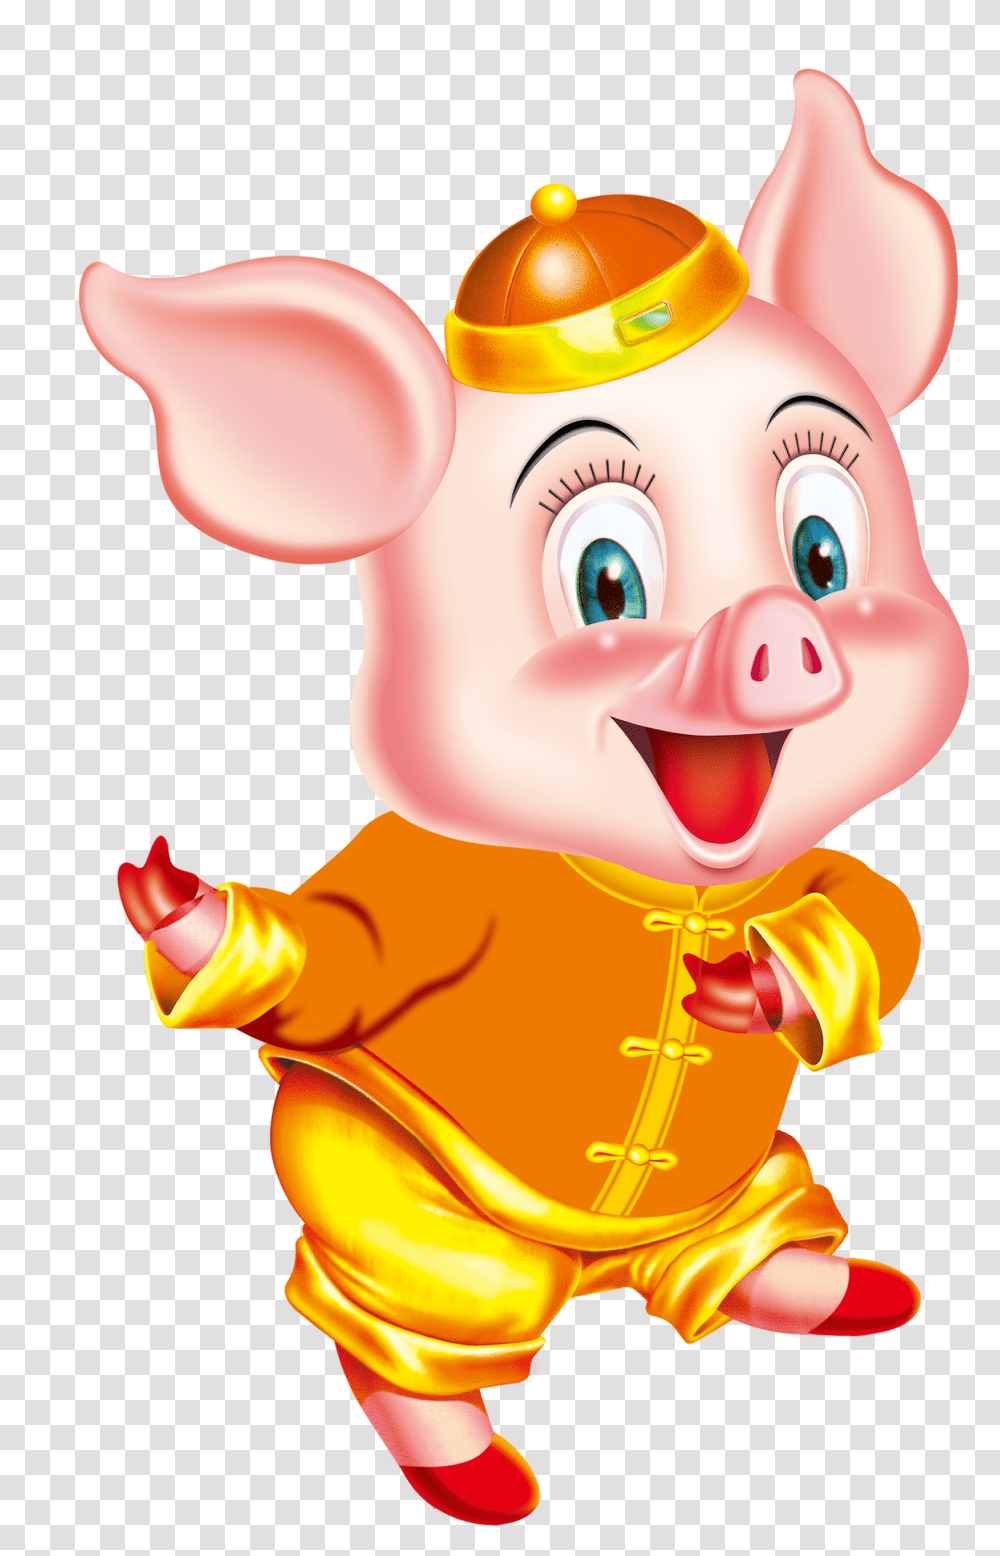 Feng Fortune Telling Chinese Pig Wu Xing Zodiac Clipart Cartoon Pig Chinese Zodiac, Toy, Mammal, Animal, Cow Transparent Png